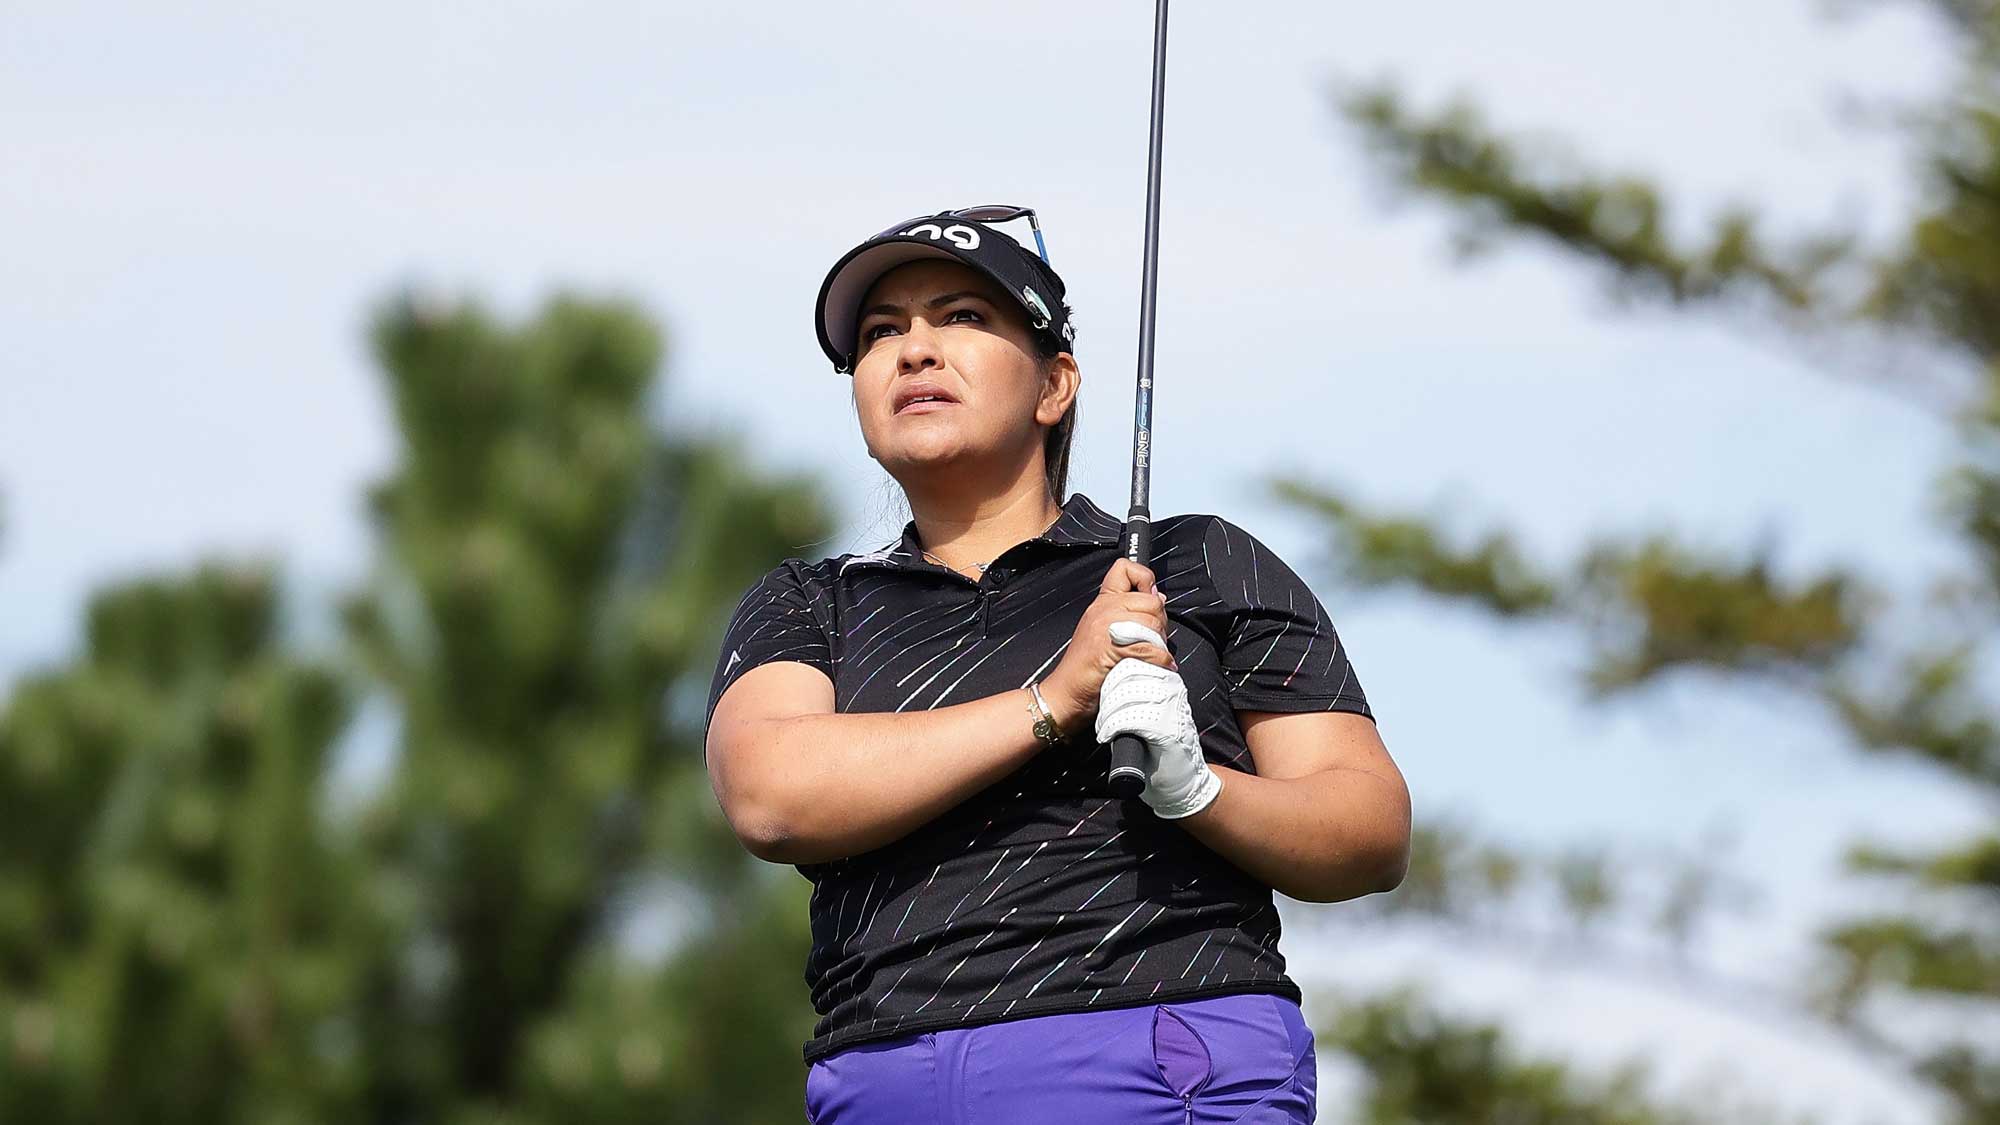 Lizette Salas of United States plays a tee shot on the 3rd hole during the final round of the LPGA KEB Hana Bank Championship